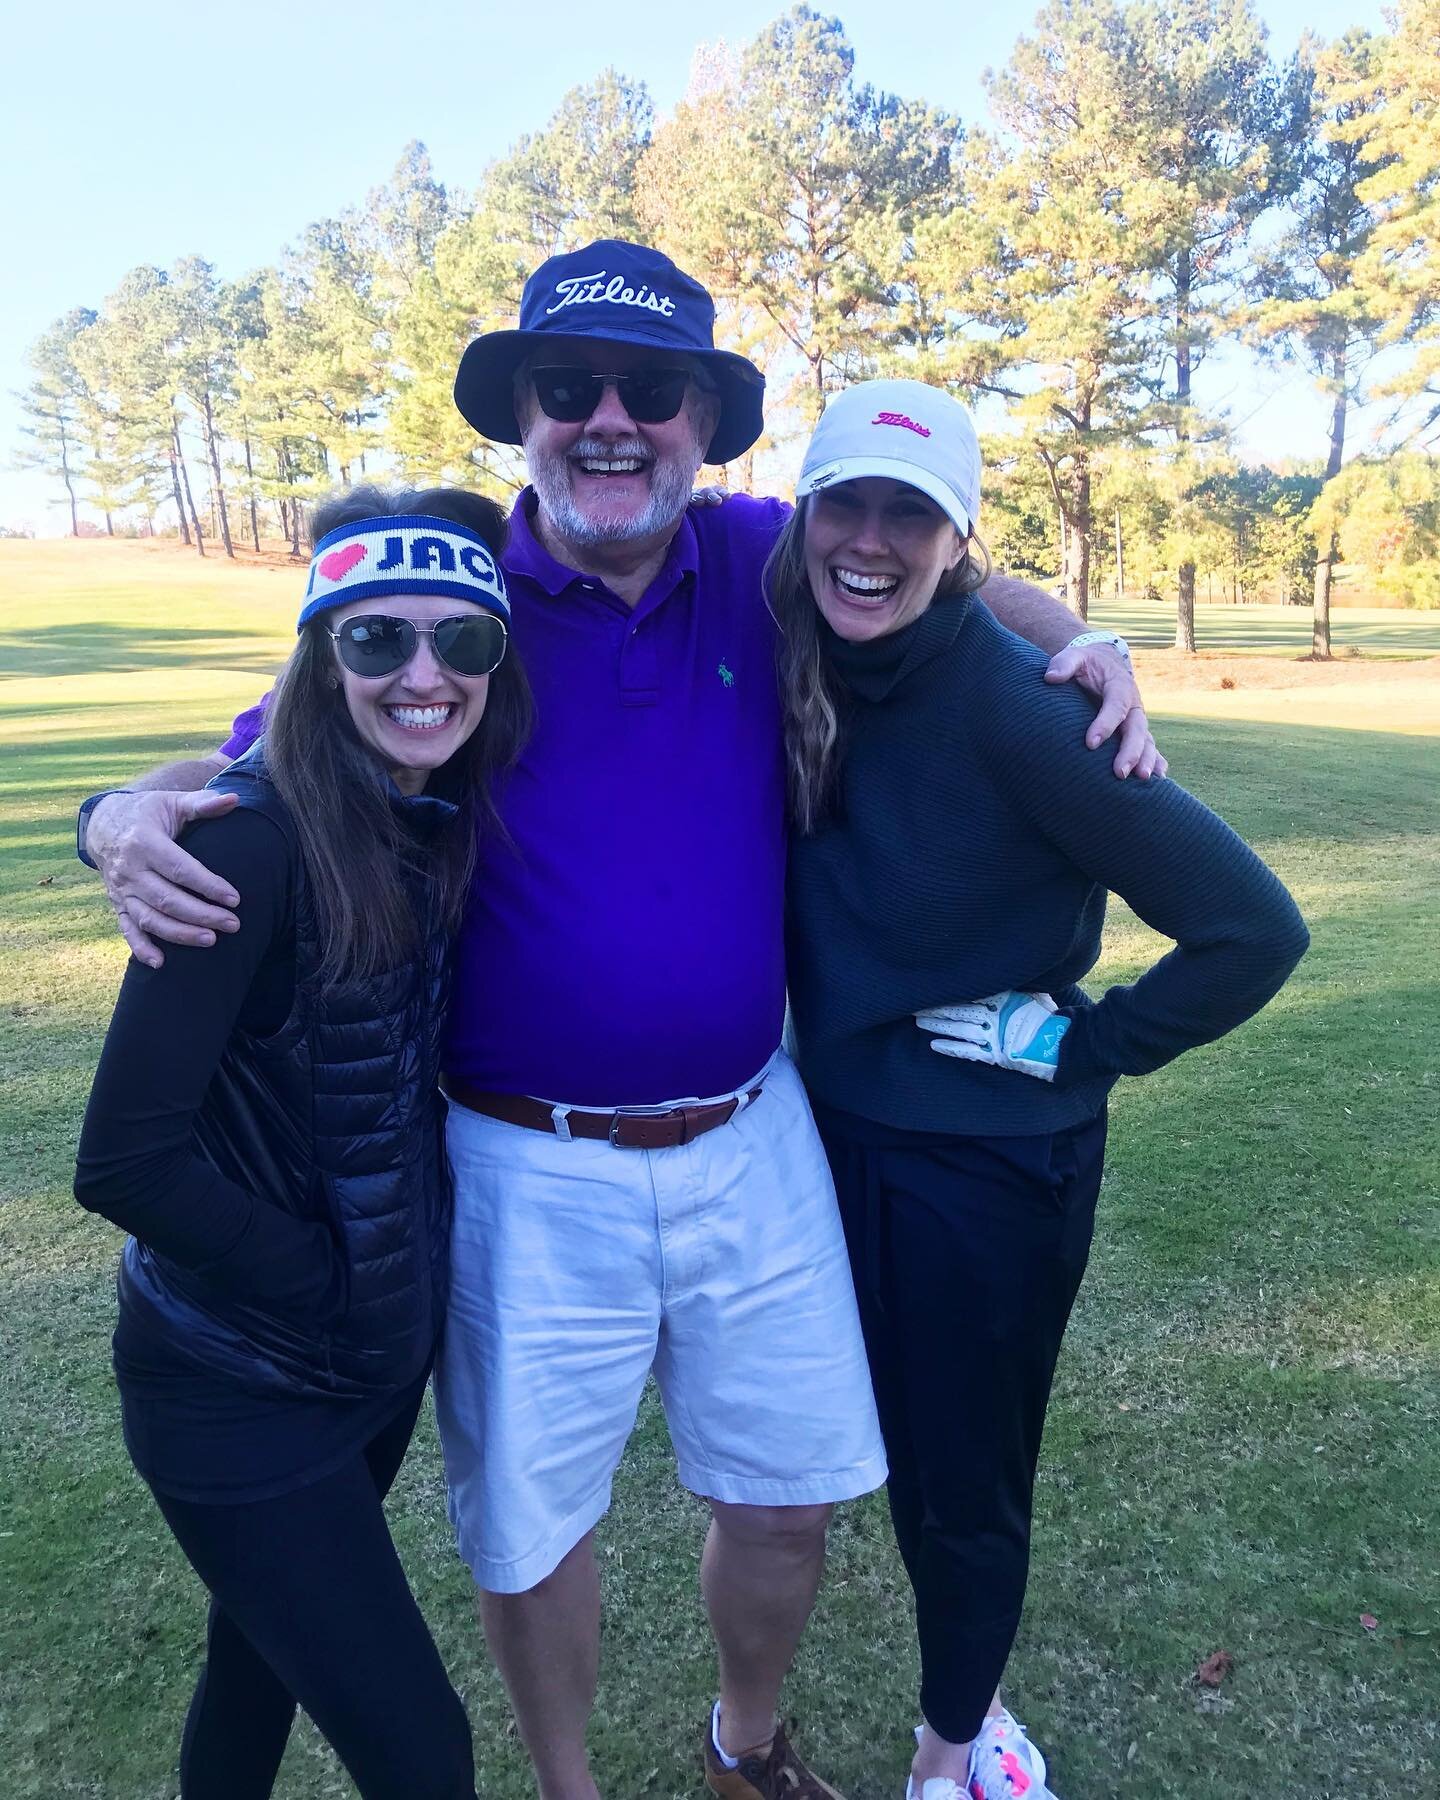 hbd 🥳 to the best dad in the world. 

wouldn&rsquo;t want to spend a beautiful tuesday on the golf course with anyone else. thanks for teaching us the lifelong love for this great game. ⛳️ (after @steelers football, of course.)

we love you.&hearts;